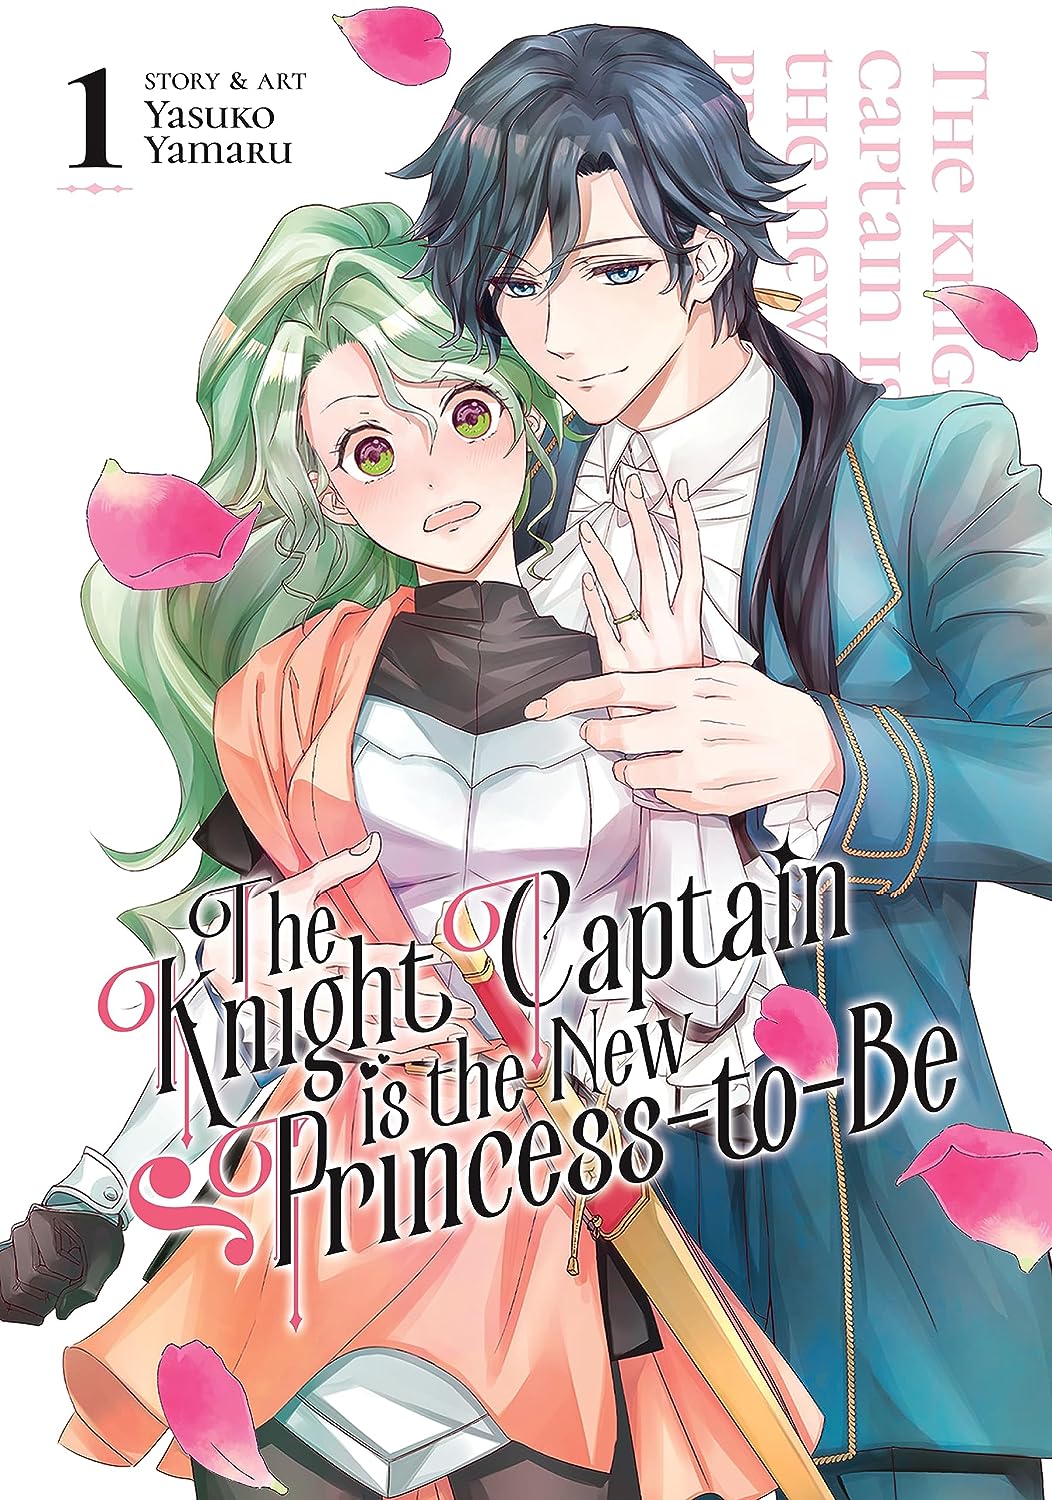 The Knight Captain Is the New Princess-to-Be Volume 1